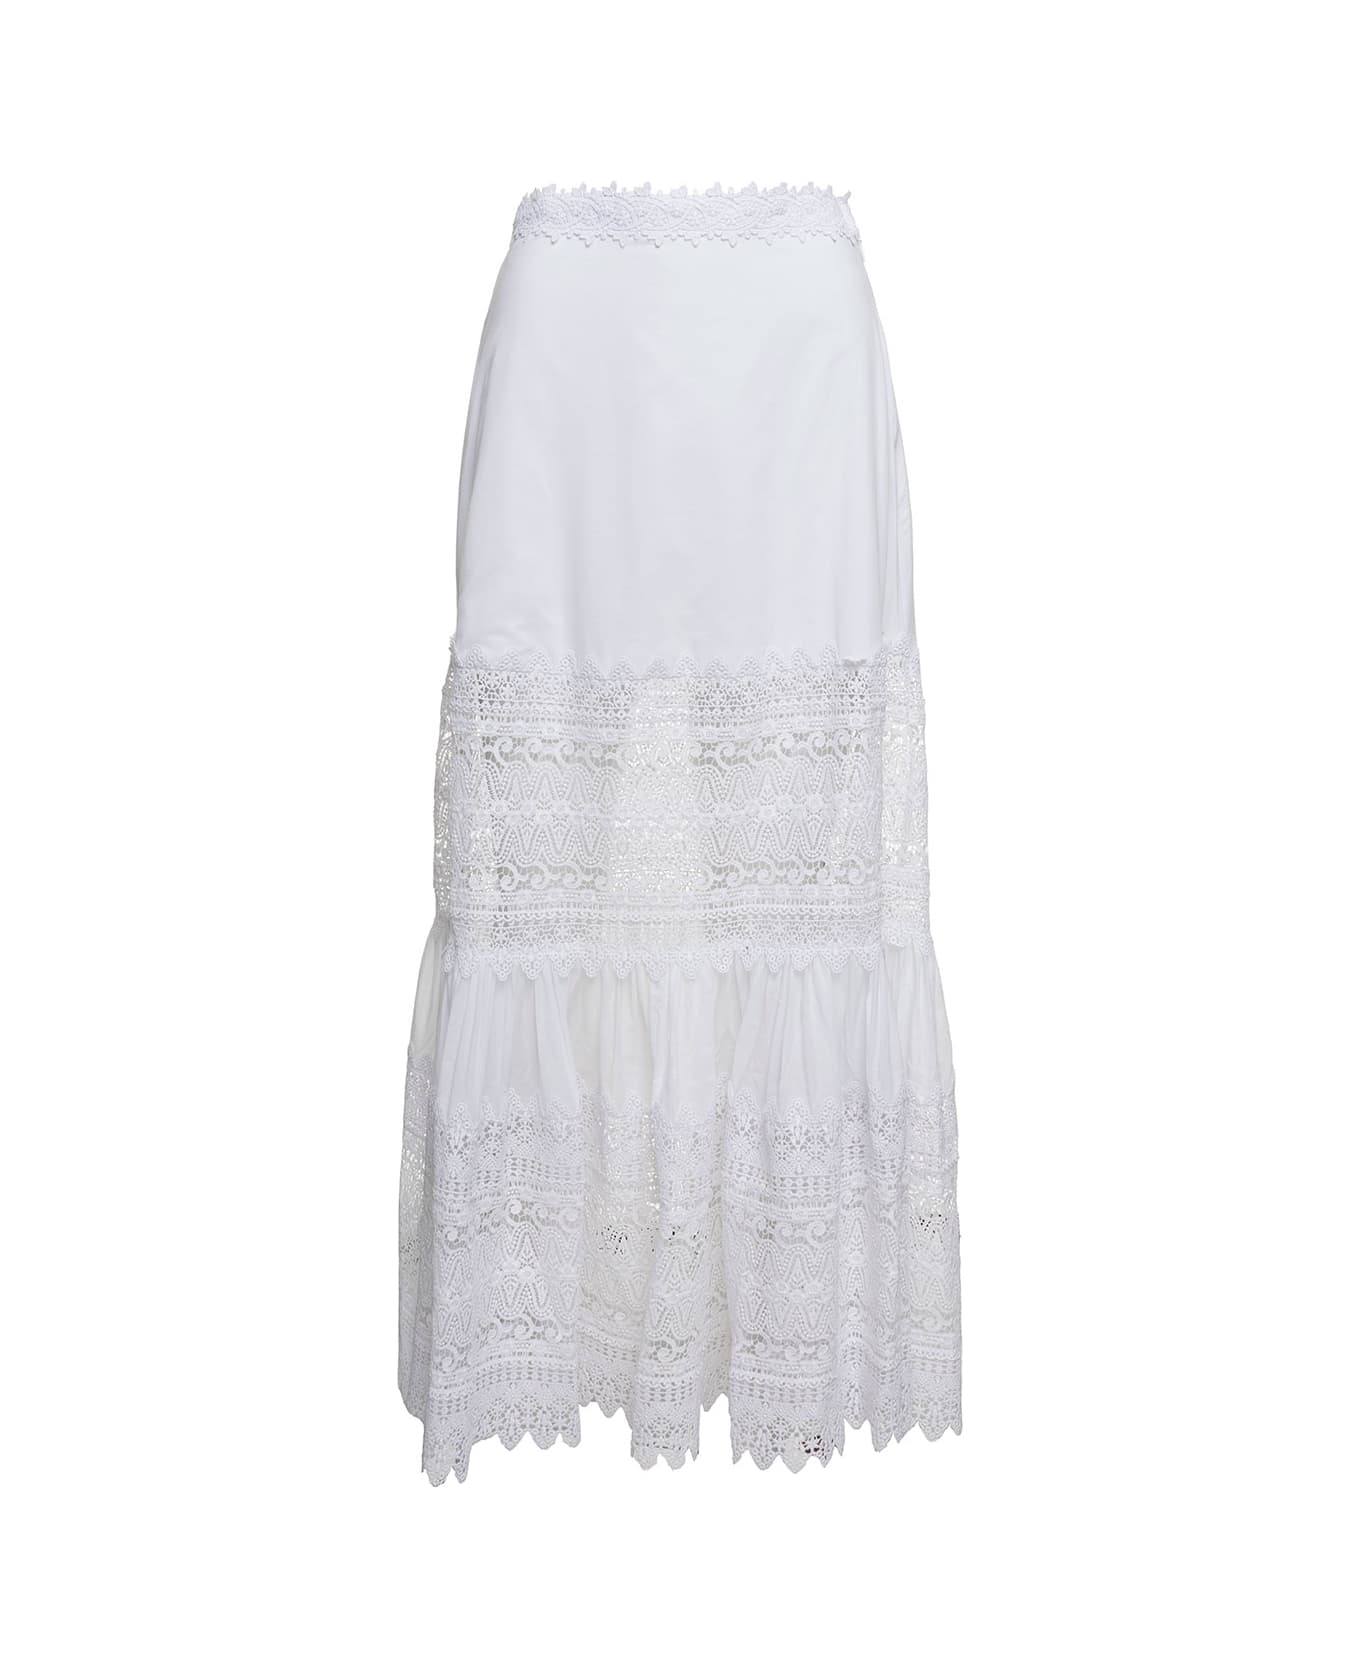 Charo Ruiz 'viola' White Flounced Skirt With Lace Inserts In Cotton Blend Woman - White